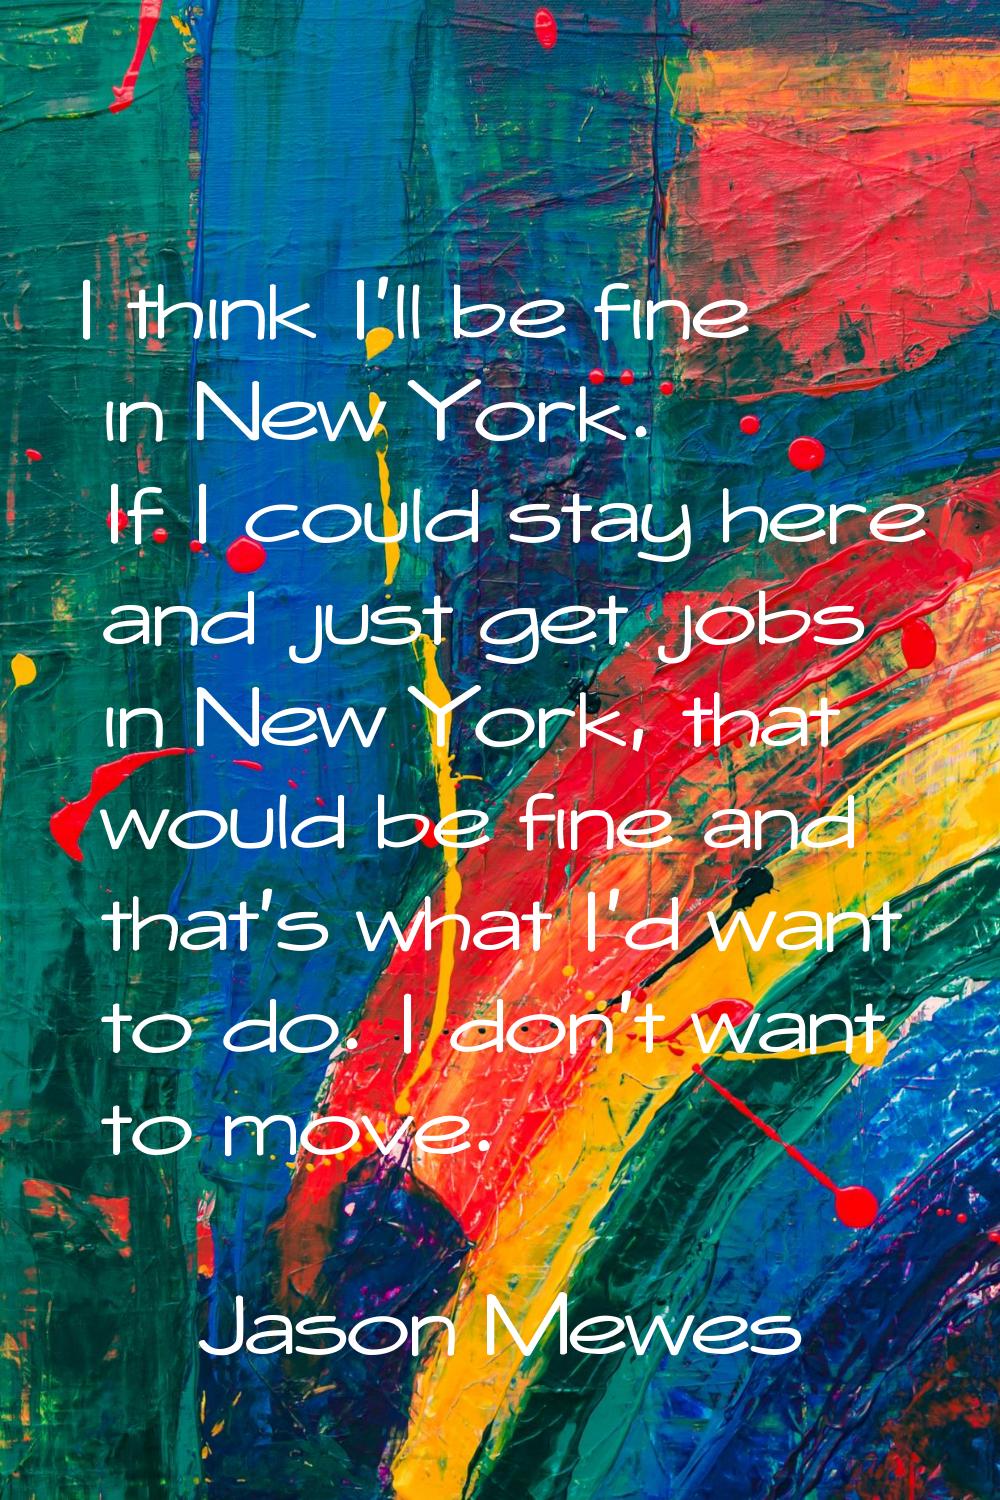 I think I'll be fine in New York. If I could stay here and just get jobs in New York, that would be